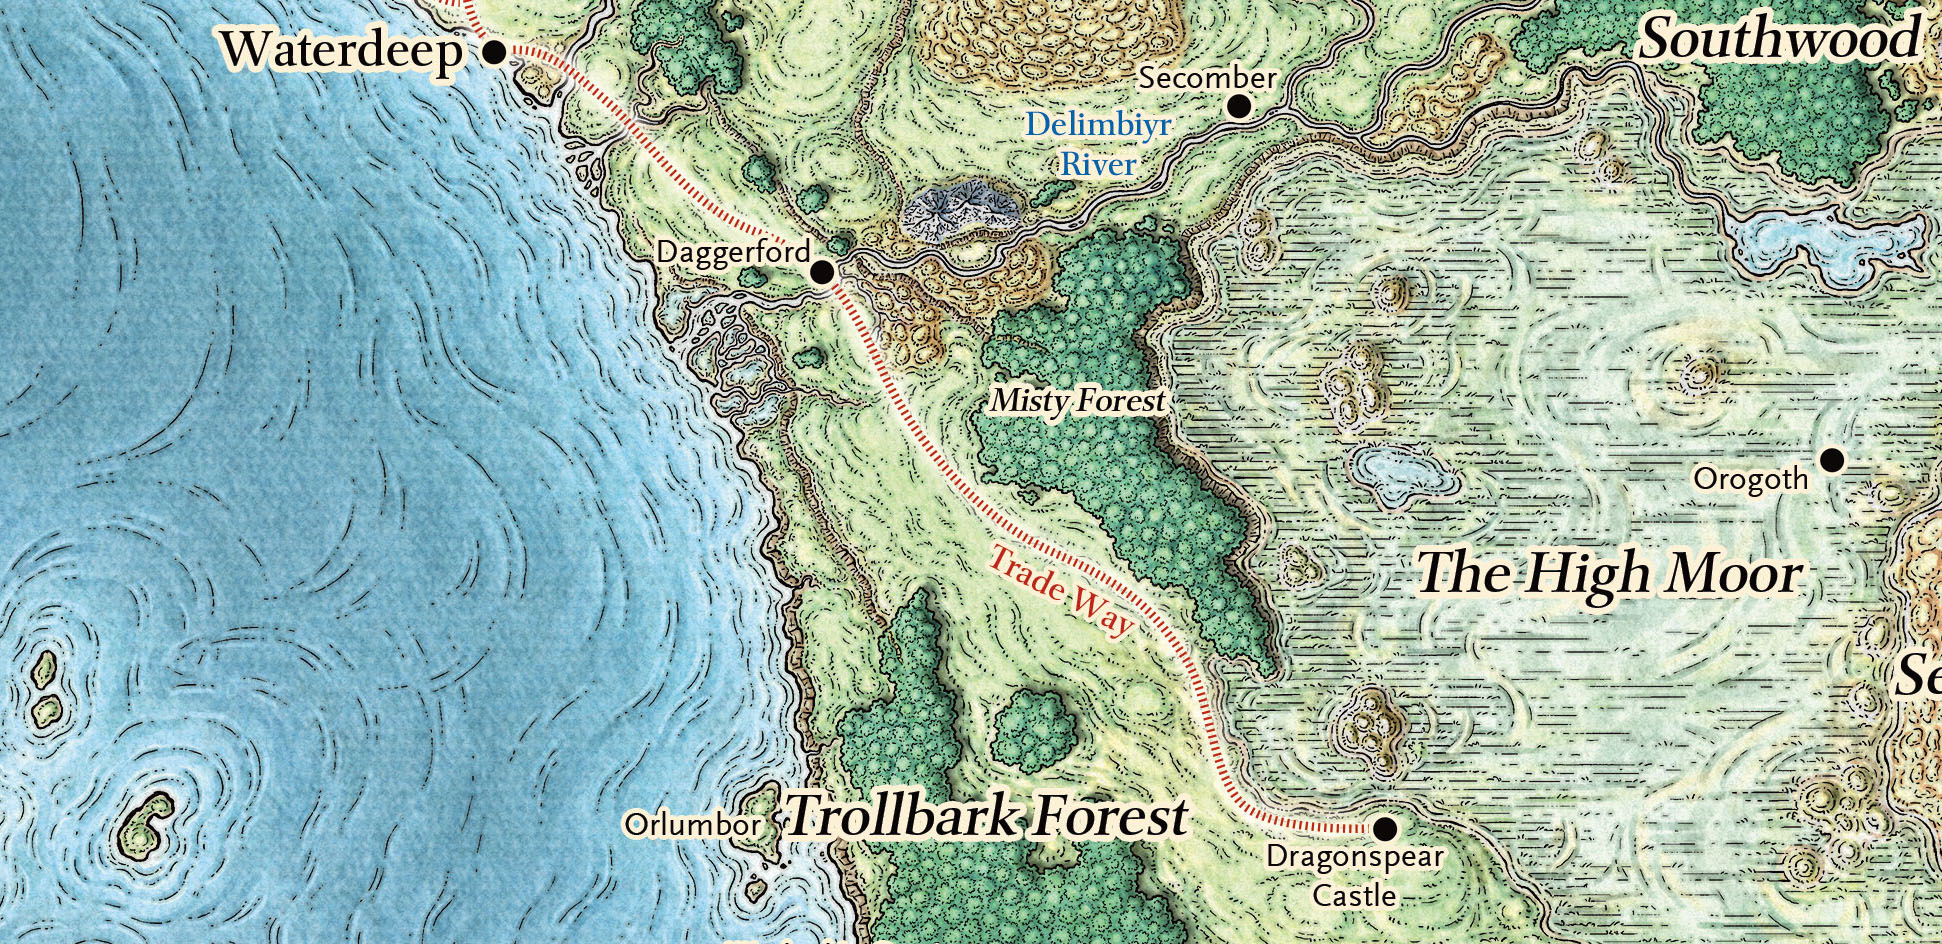 Forgotten Realms - Secomber to Dragonspear Castle